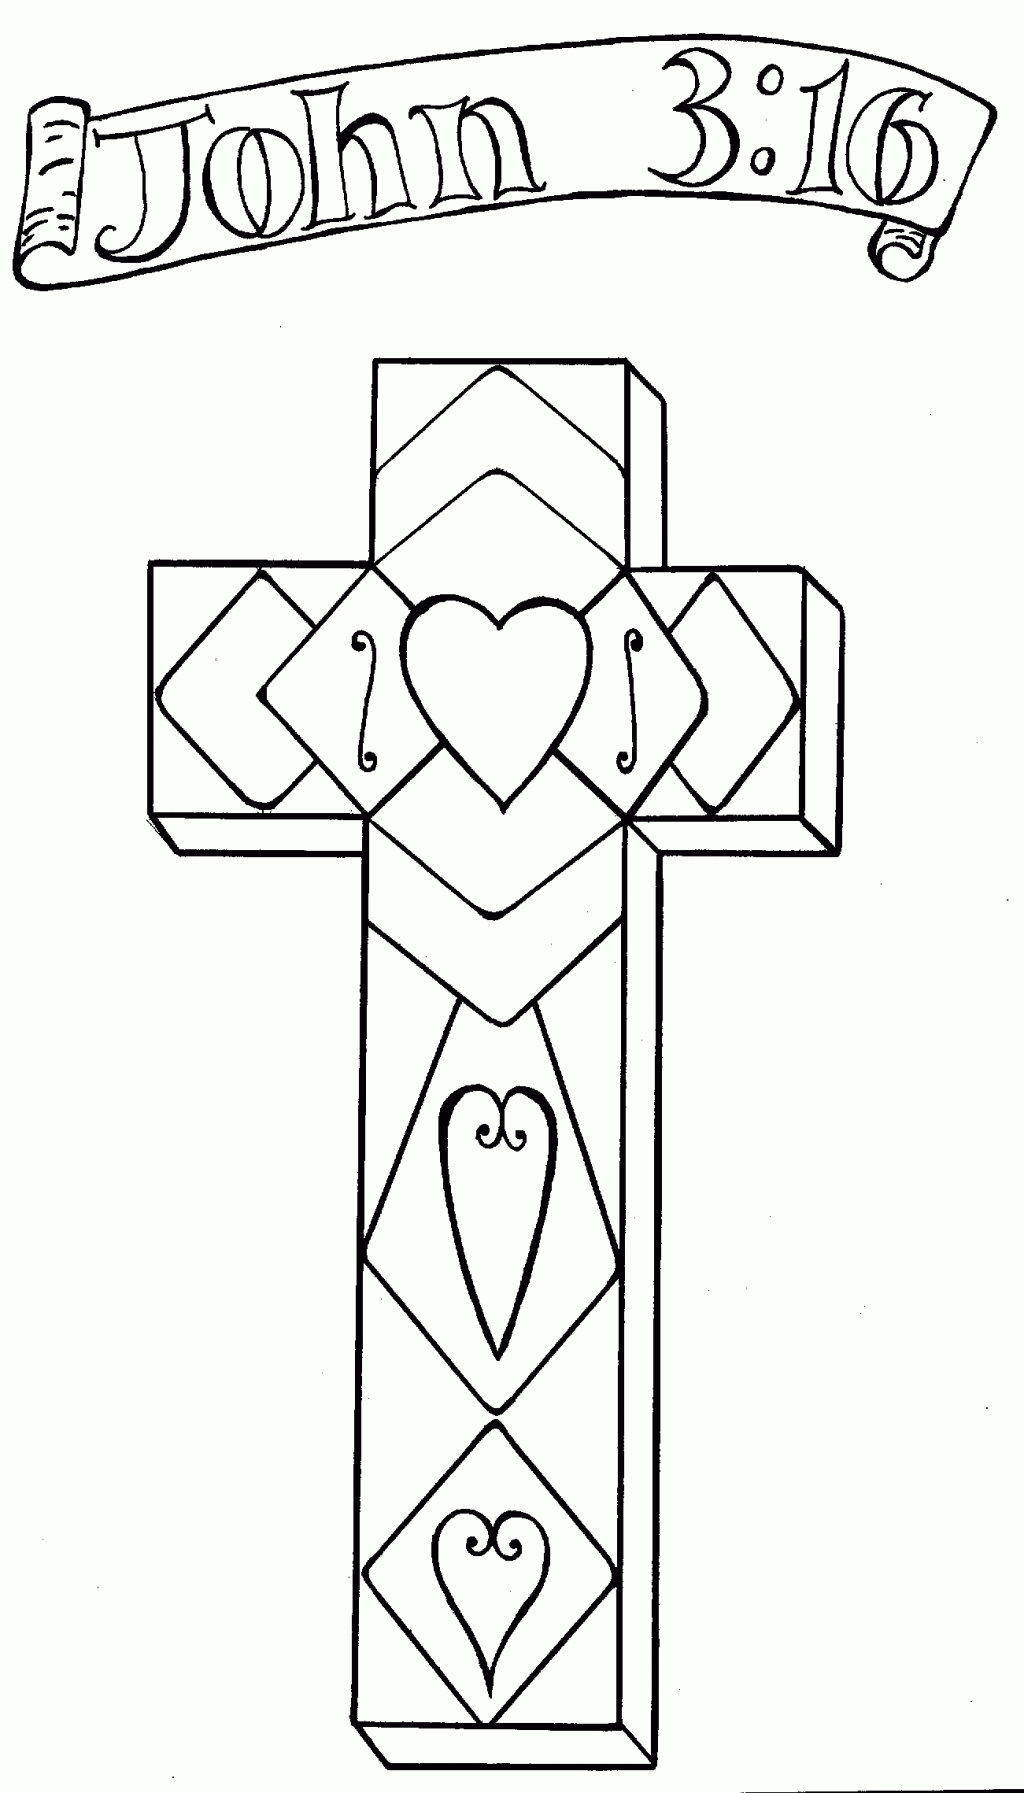 Coloring Pages ~ Free Printable Religious Coloring Pages For Spring - Free Printable Religious Easter Bookmarks